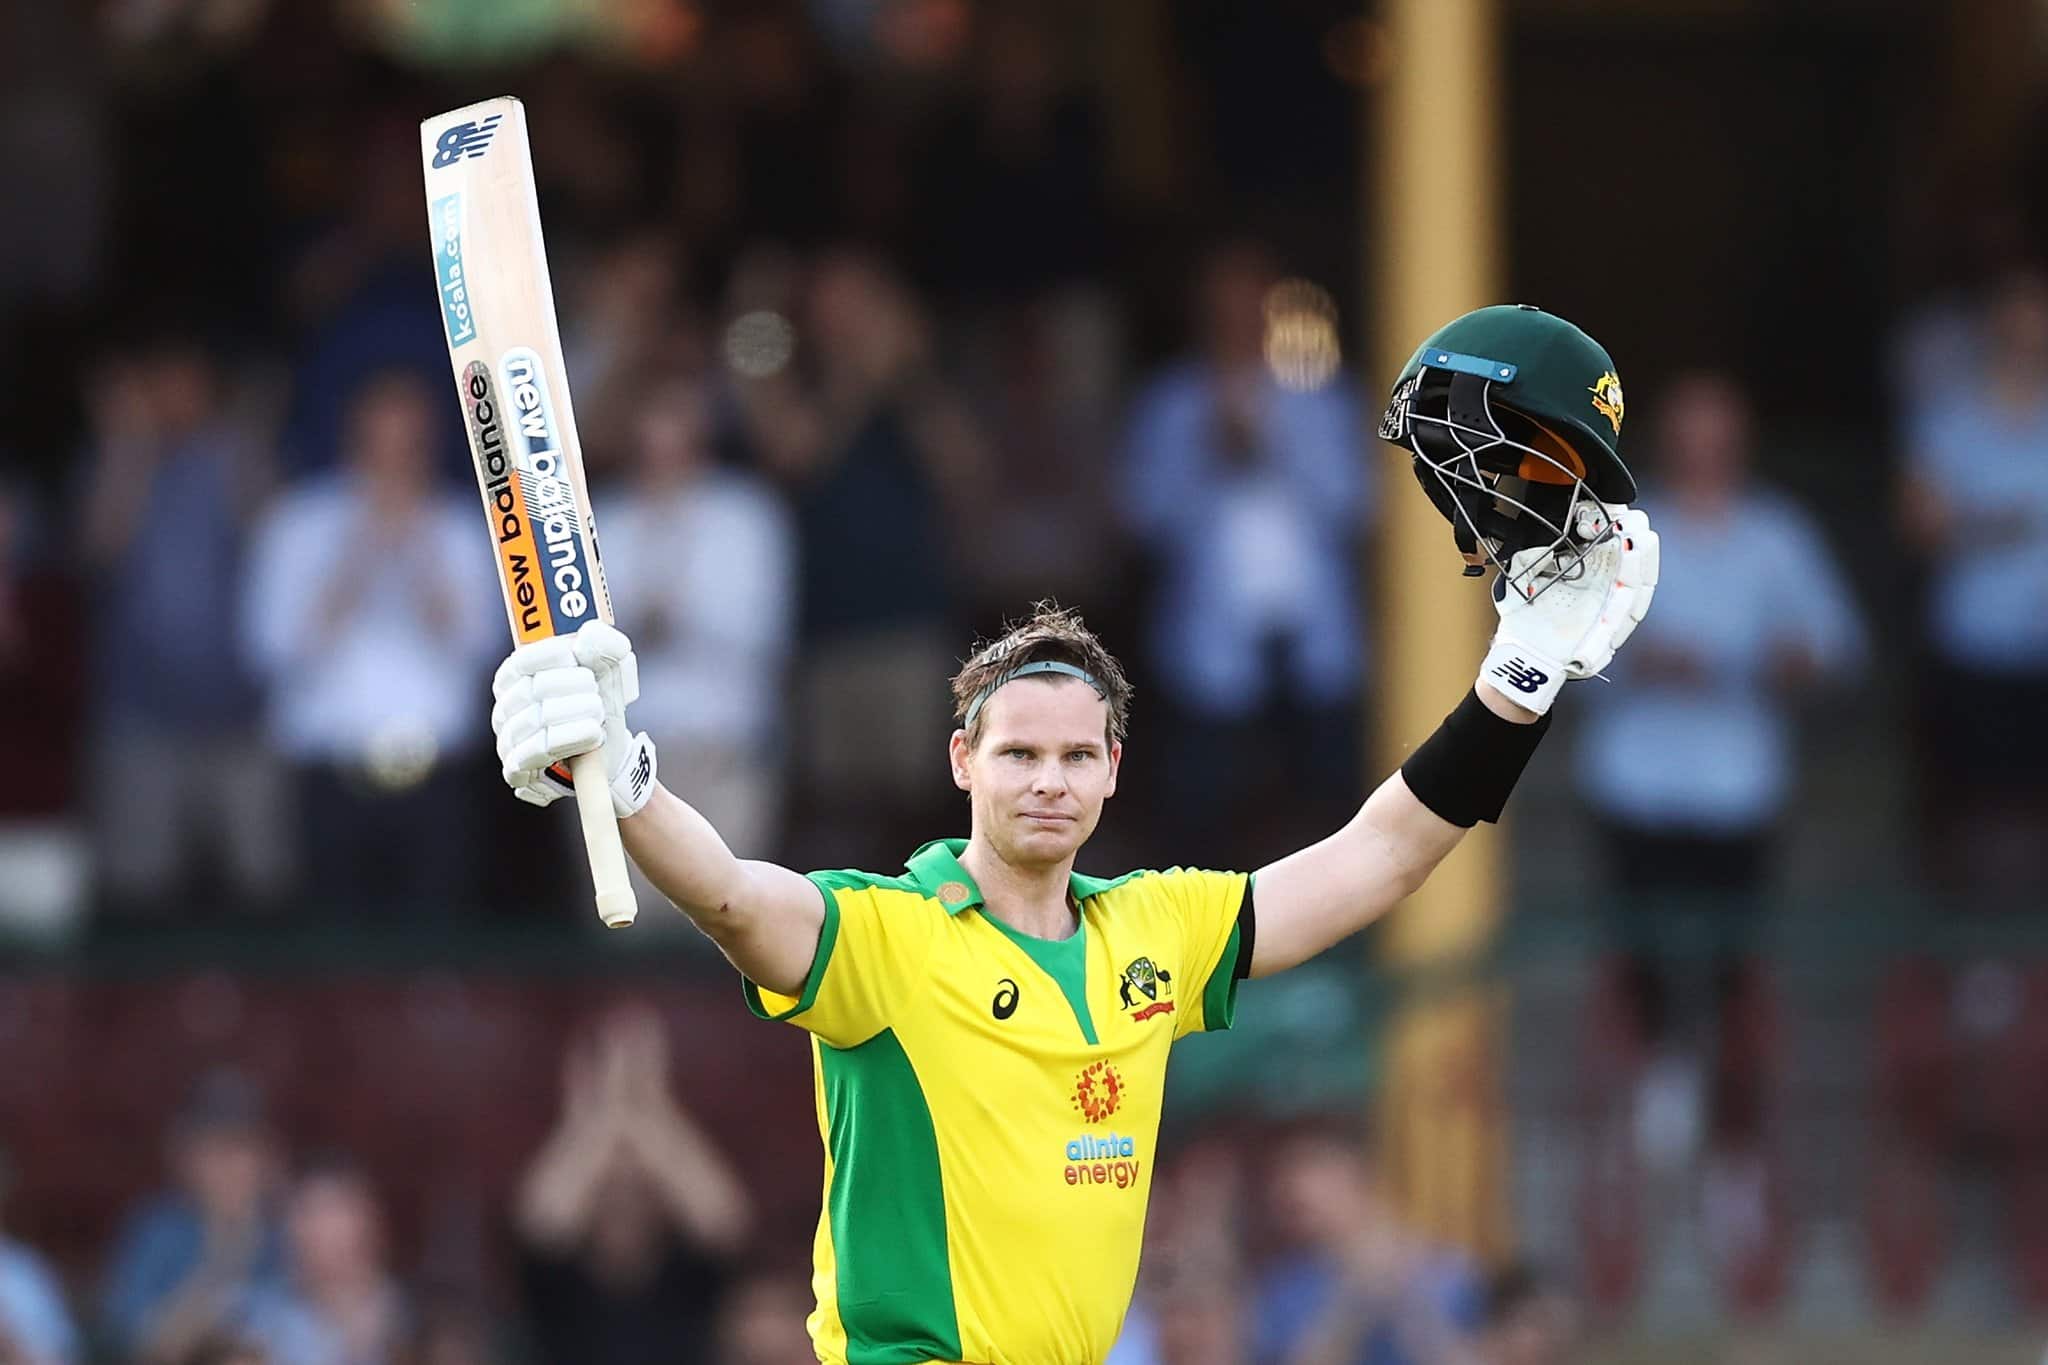 Steve Smith Reaches Another Staggering Milestone in IND-AUS Rajkot ODI